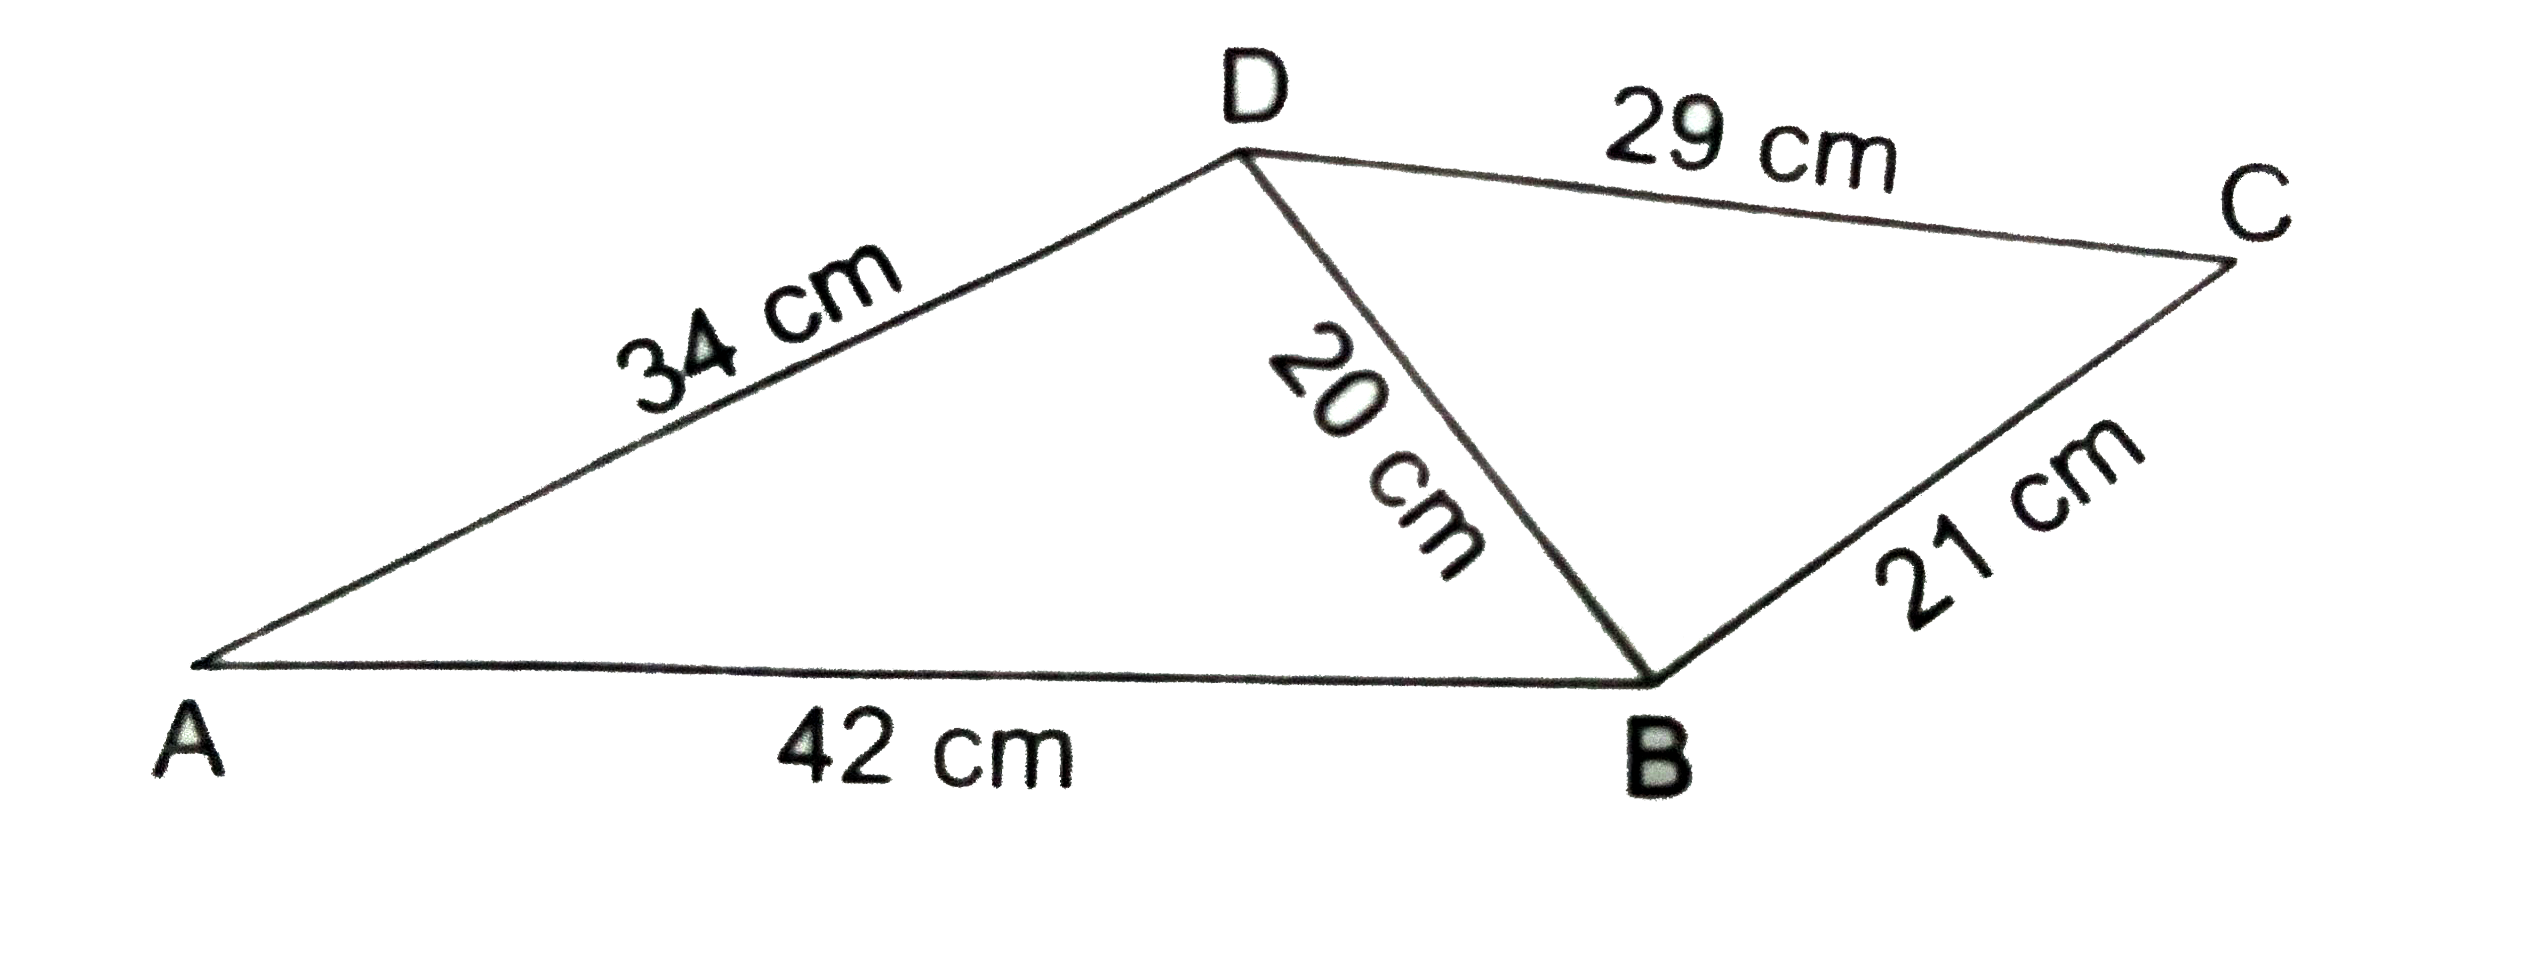 Find the  area of the  quadrilateral ABCD in  which  AB= 42 cm. Bc=21 cm ,CD=29 cm ,DA = 34 cm and  diagonal  BD= 20 cm .